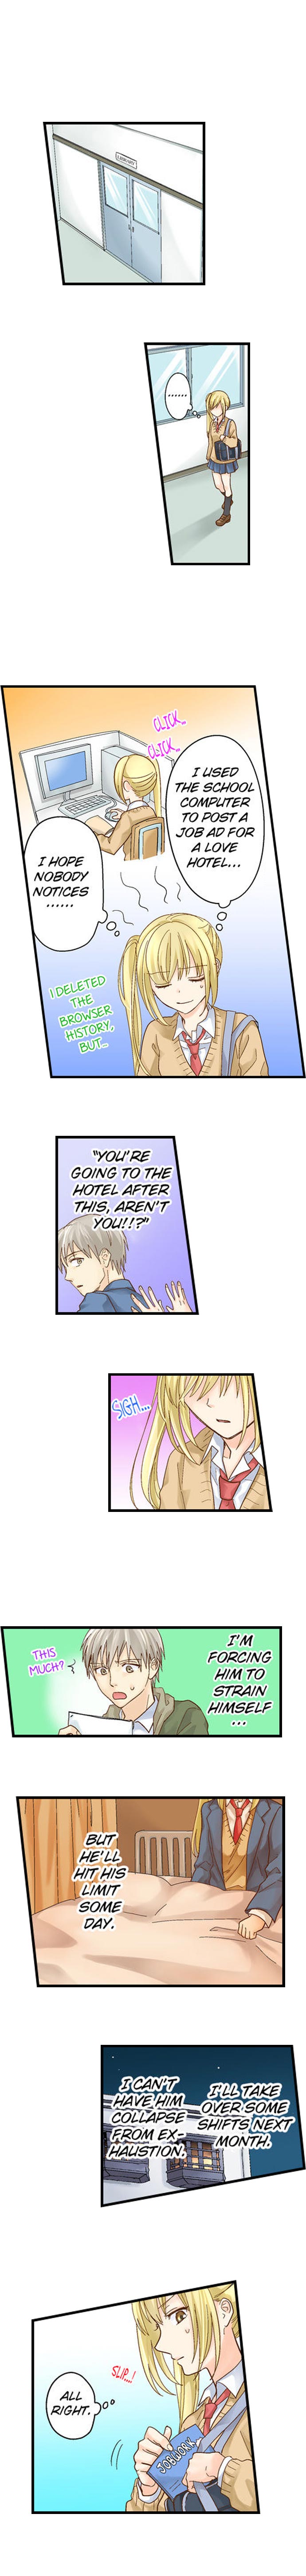 Running a Love Hotel with My Math Teacher - Chapter 48 Page 4